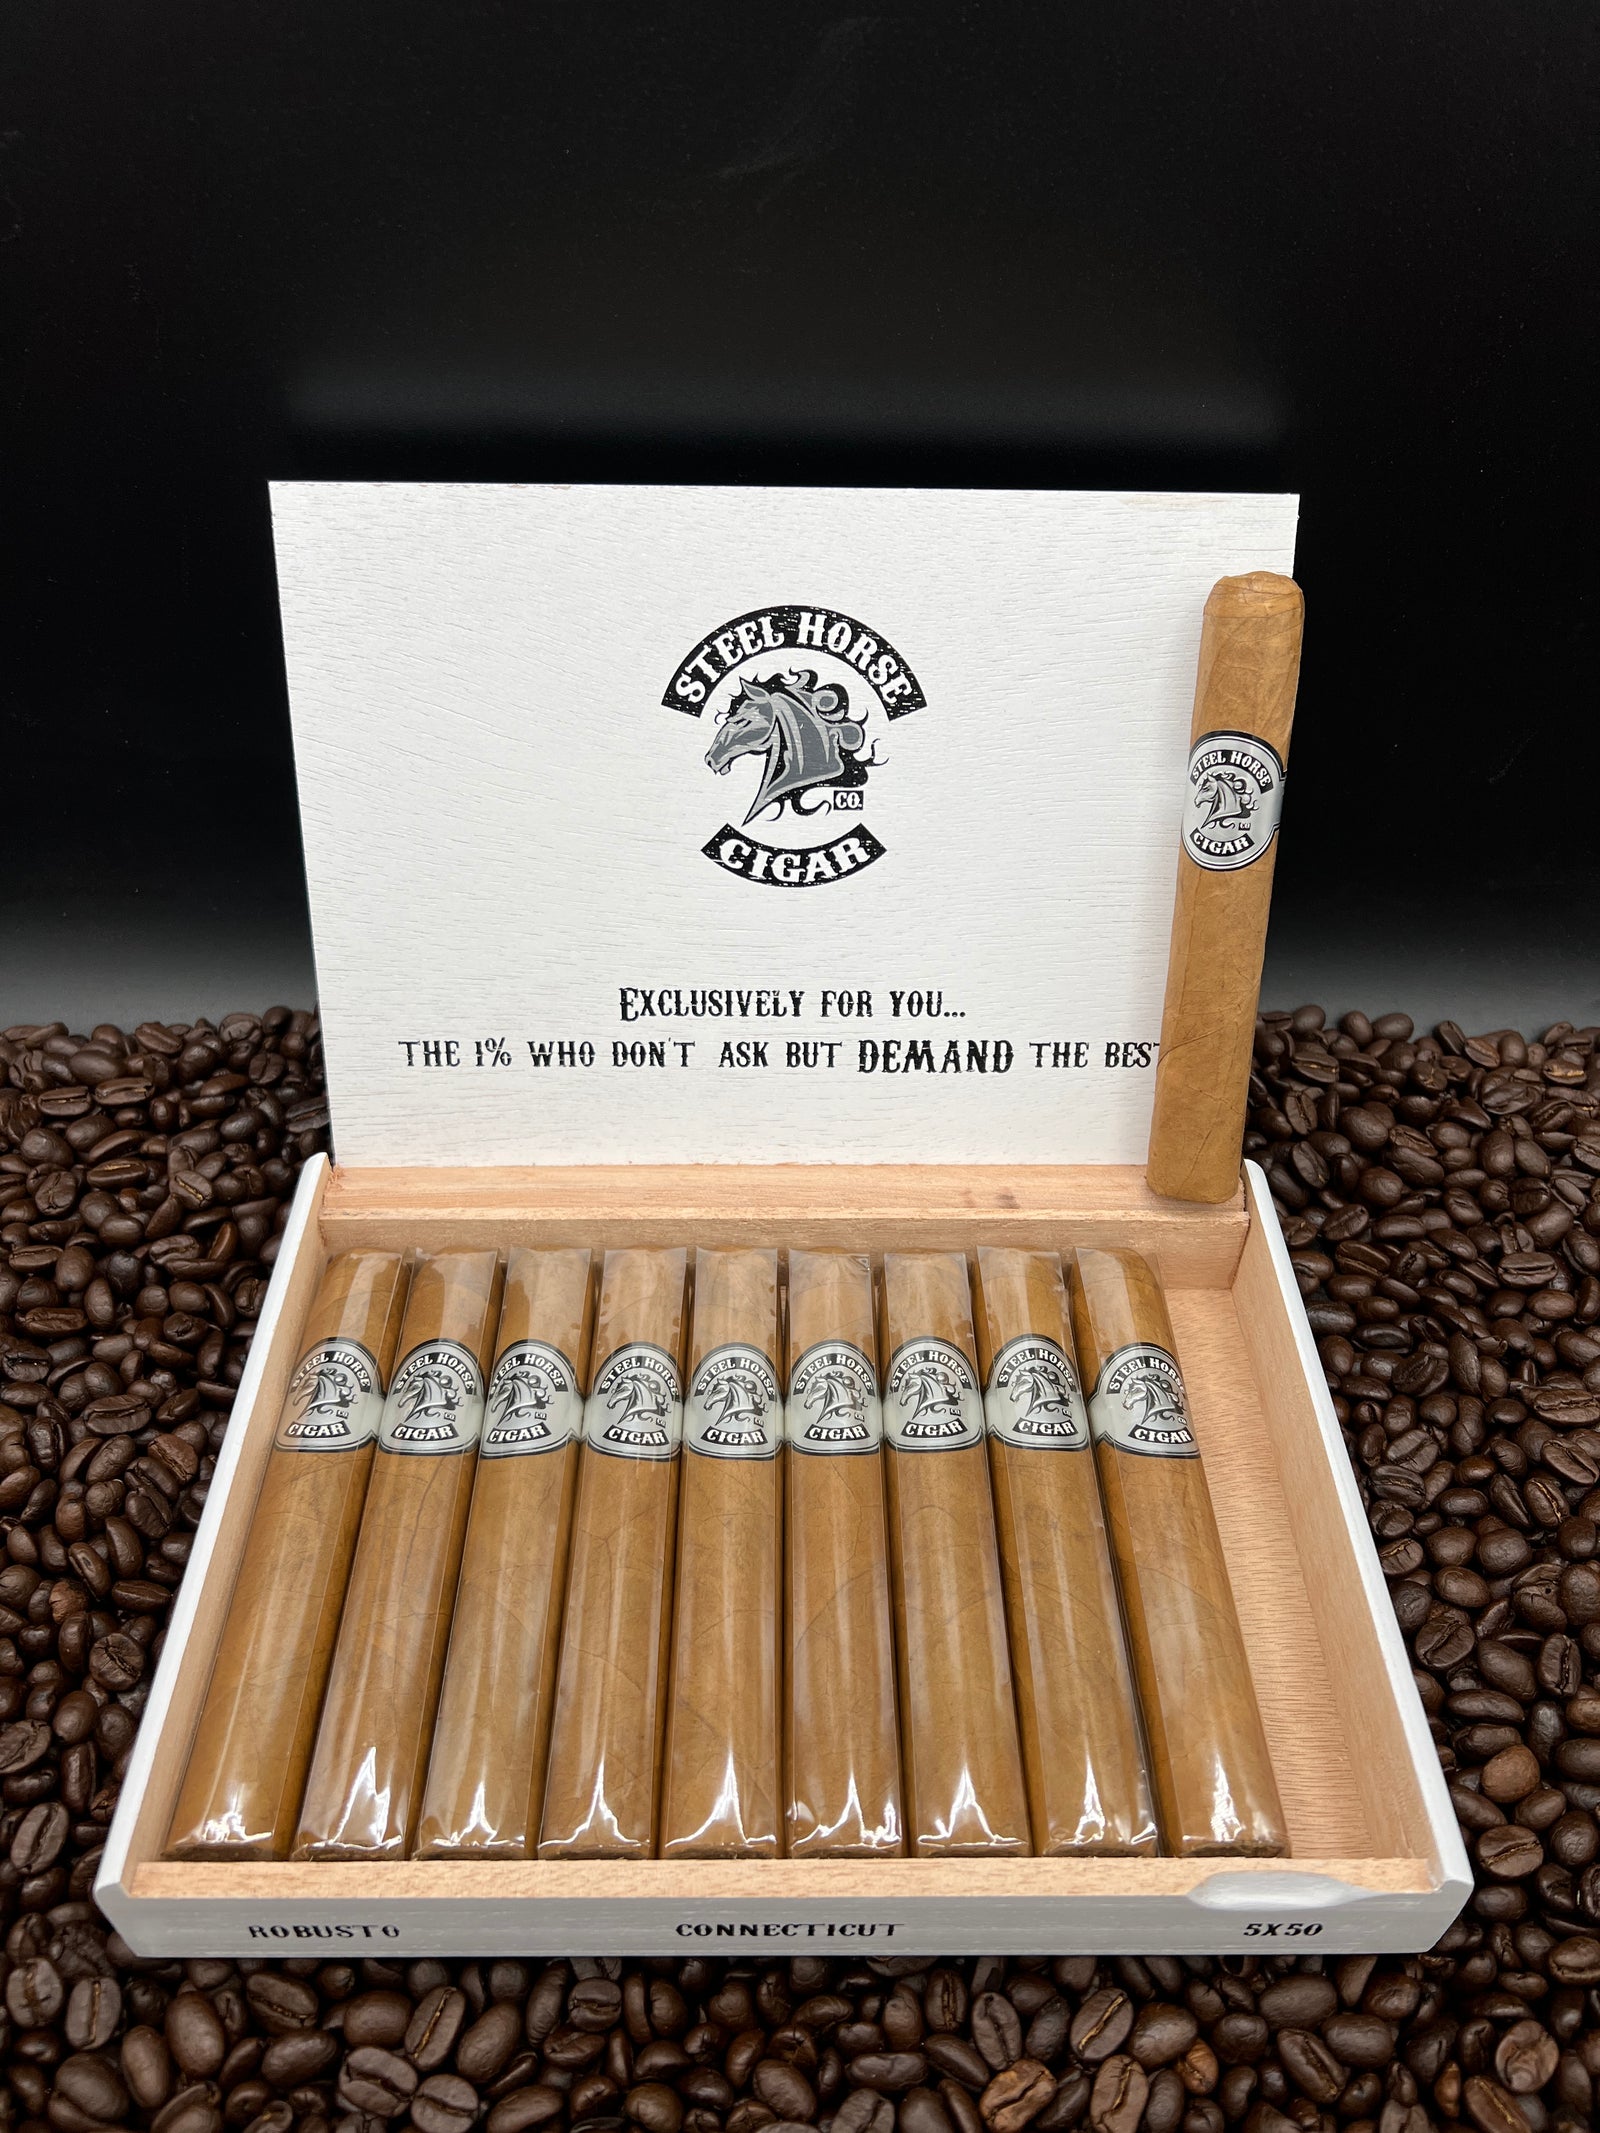 Steel Horse Cigars - Connecticut Robusto